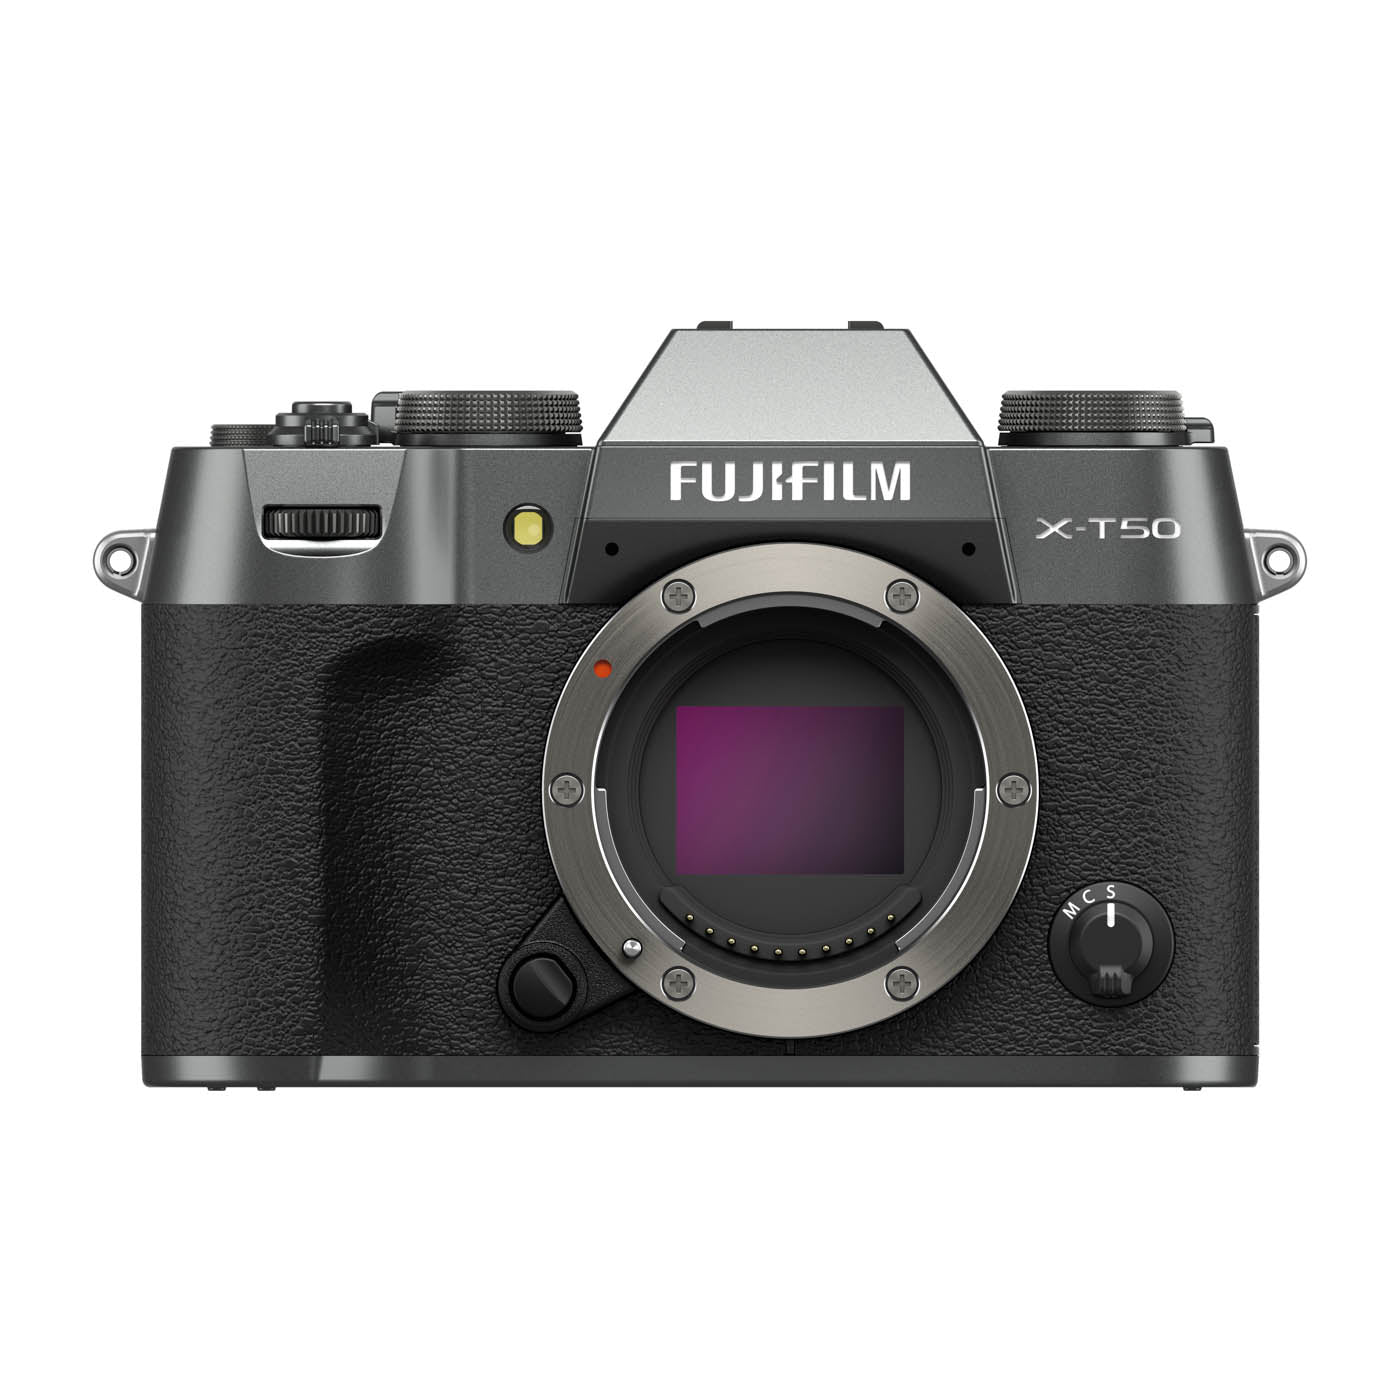 Fujifilm X-T50 Mirrorless Camera Body Only - Charcoal Silver